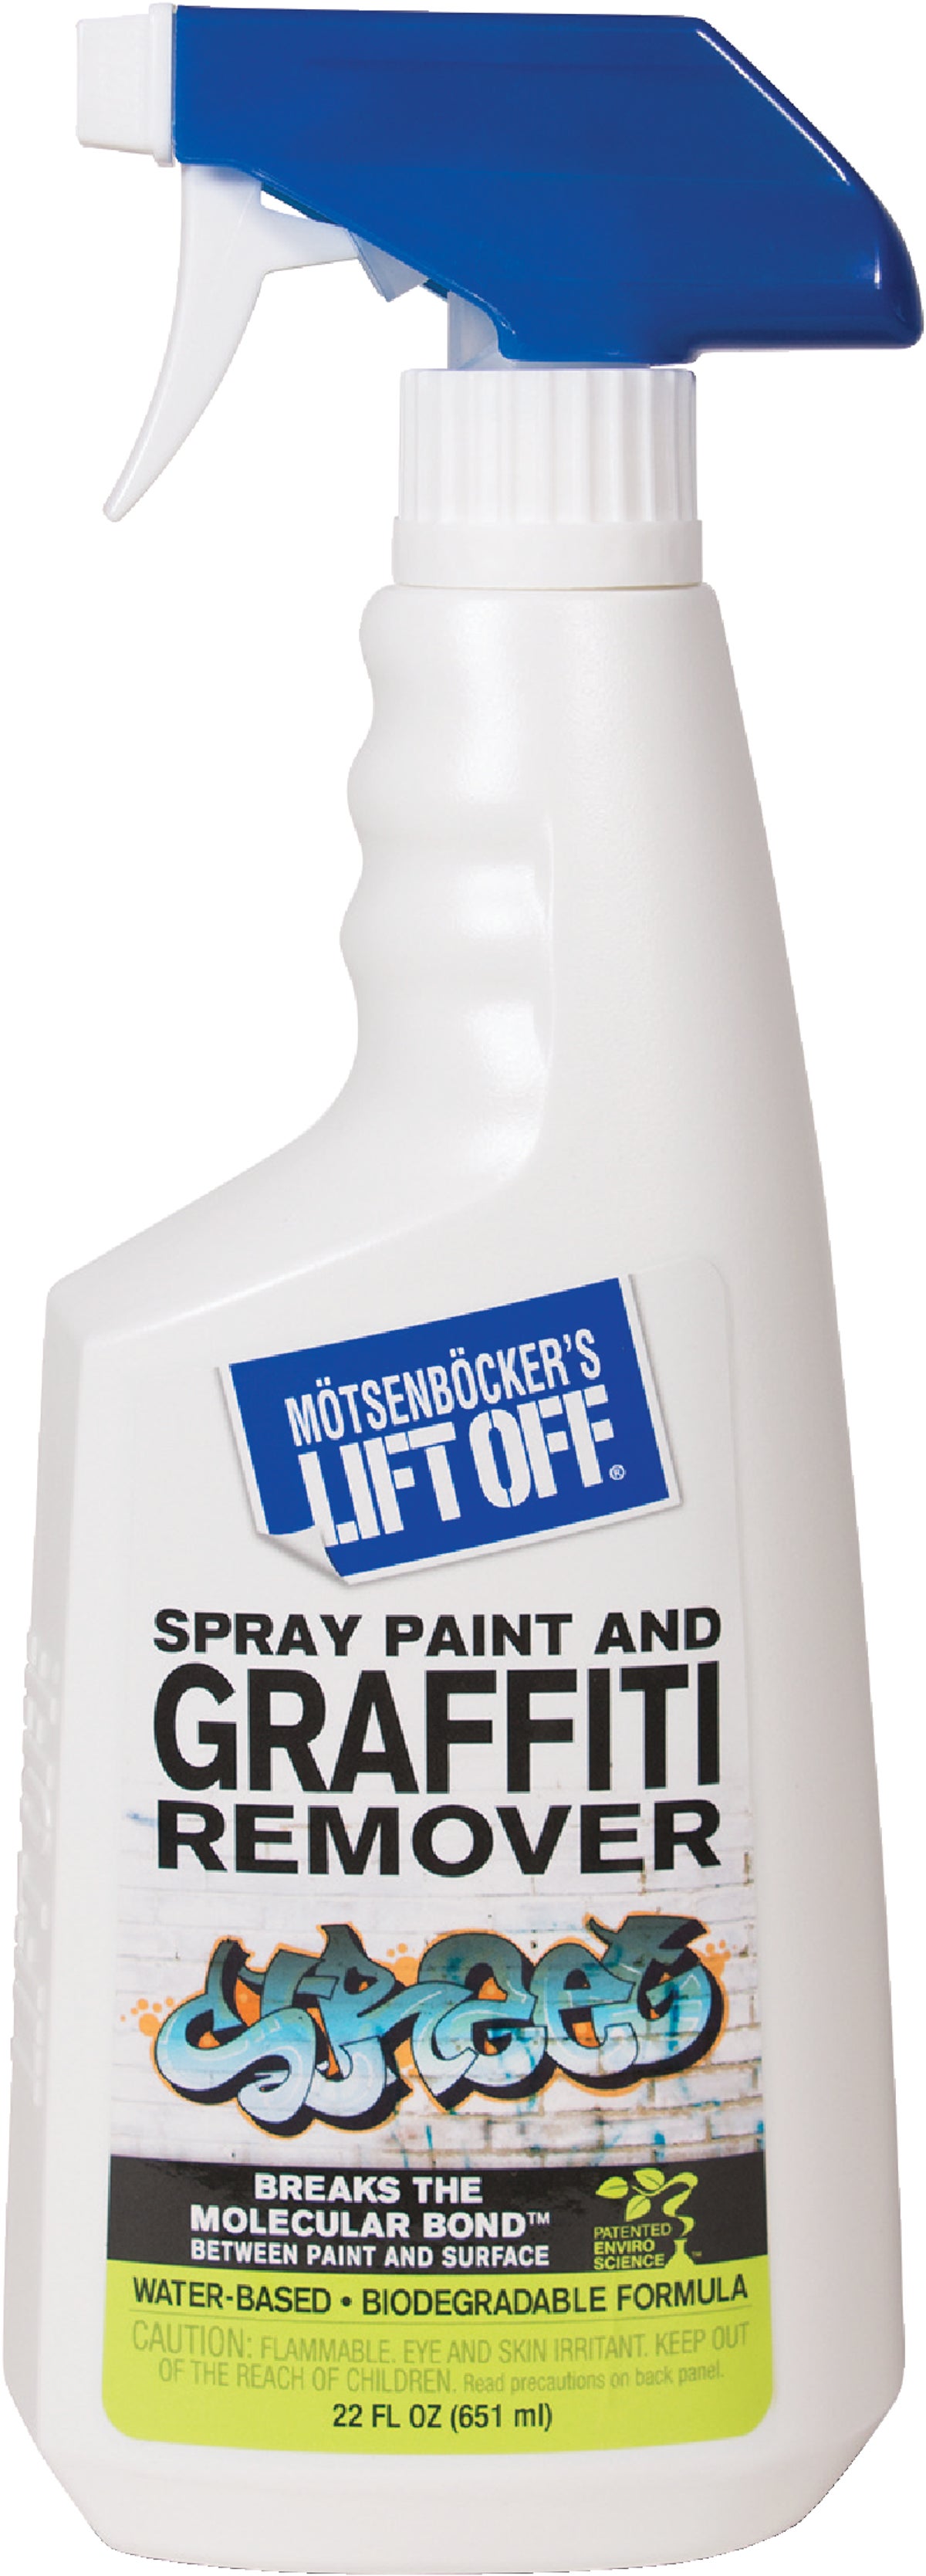 Goof Off gallon - household items - by owner - housewares sale